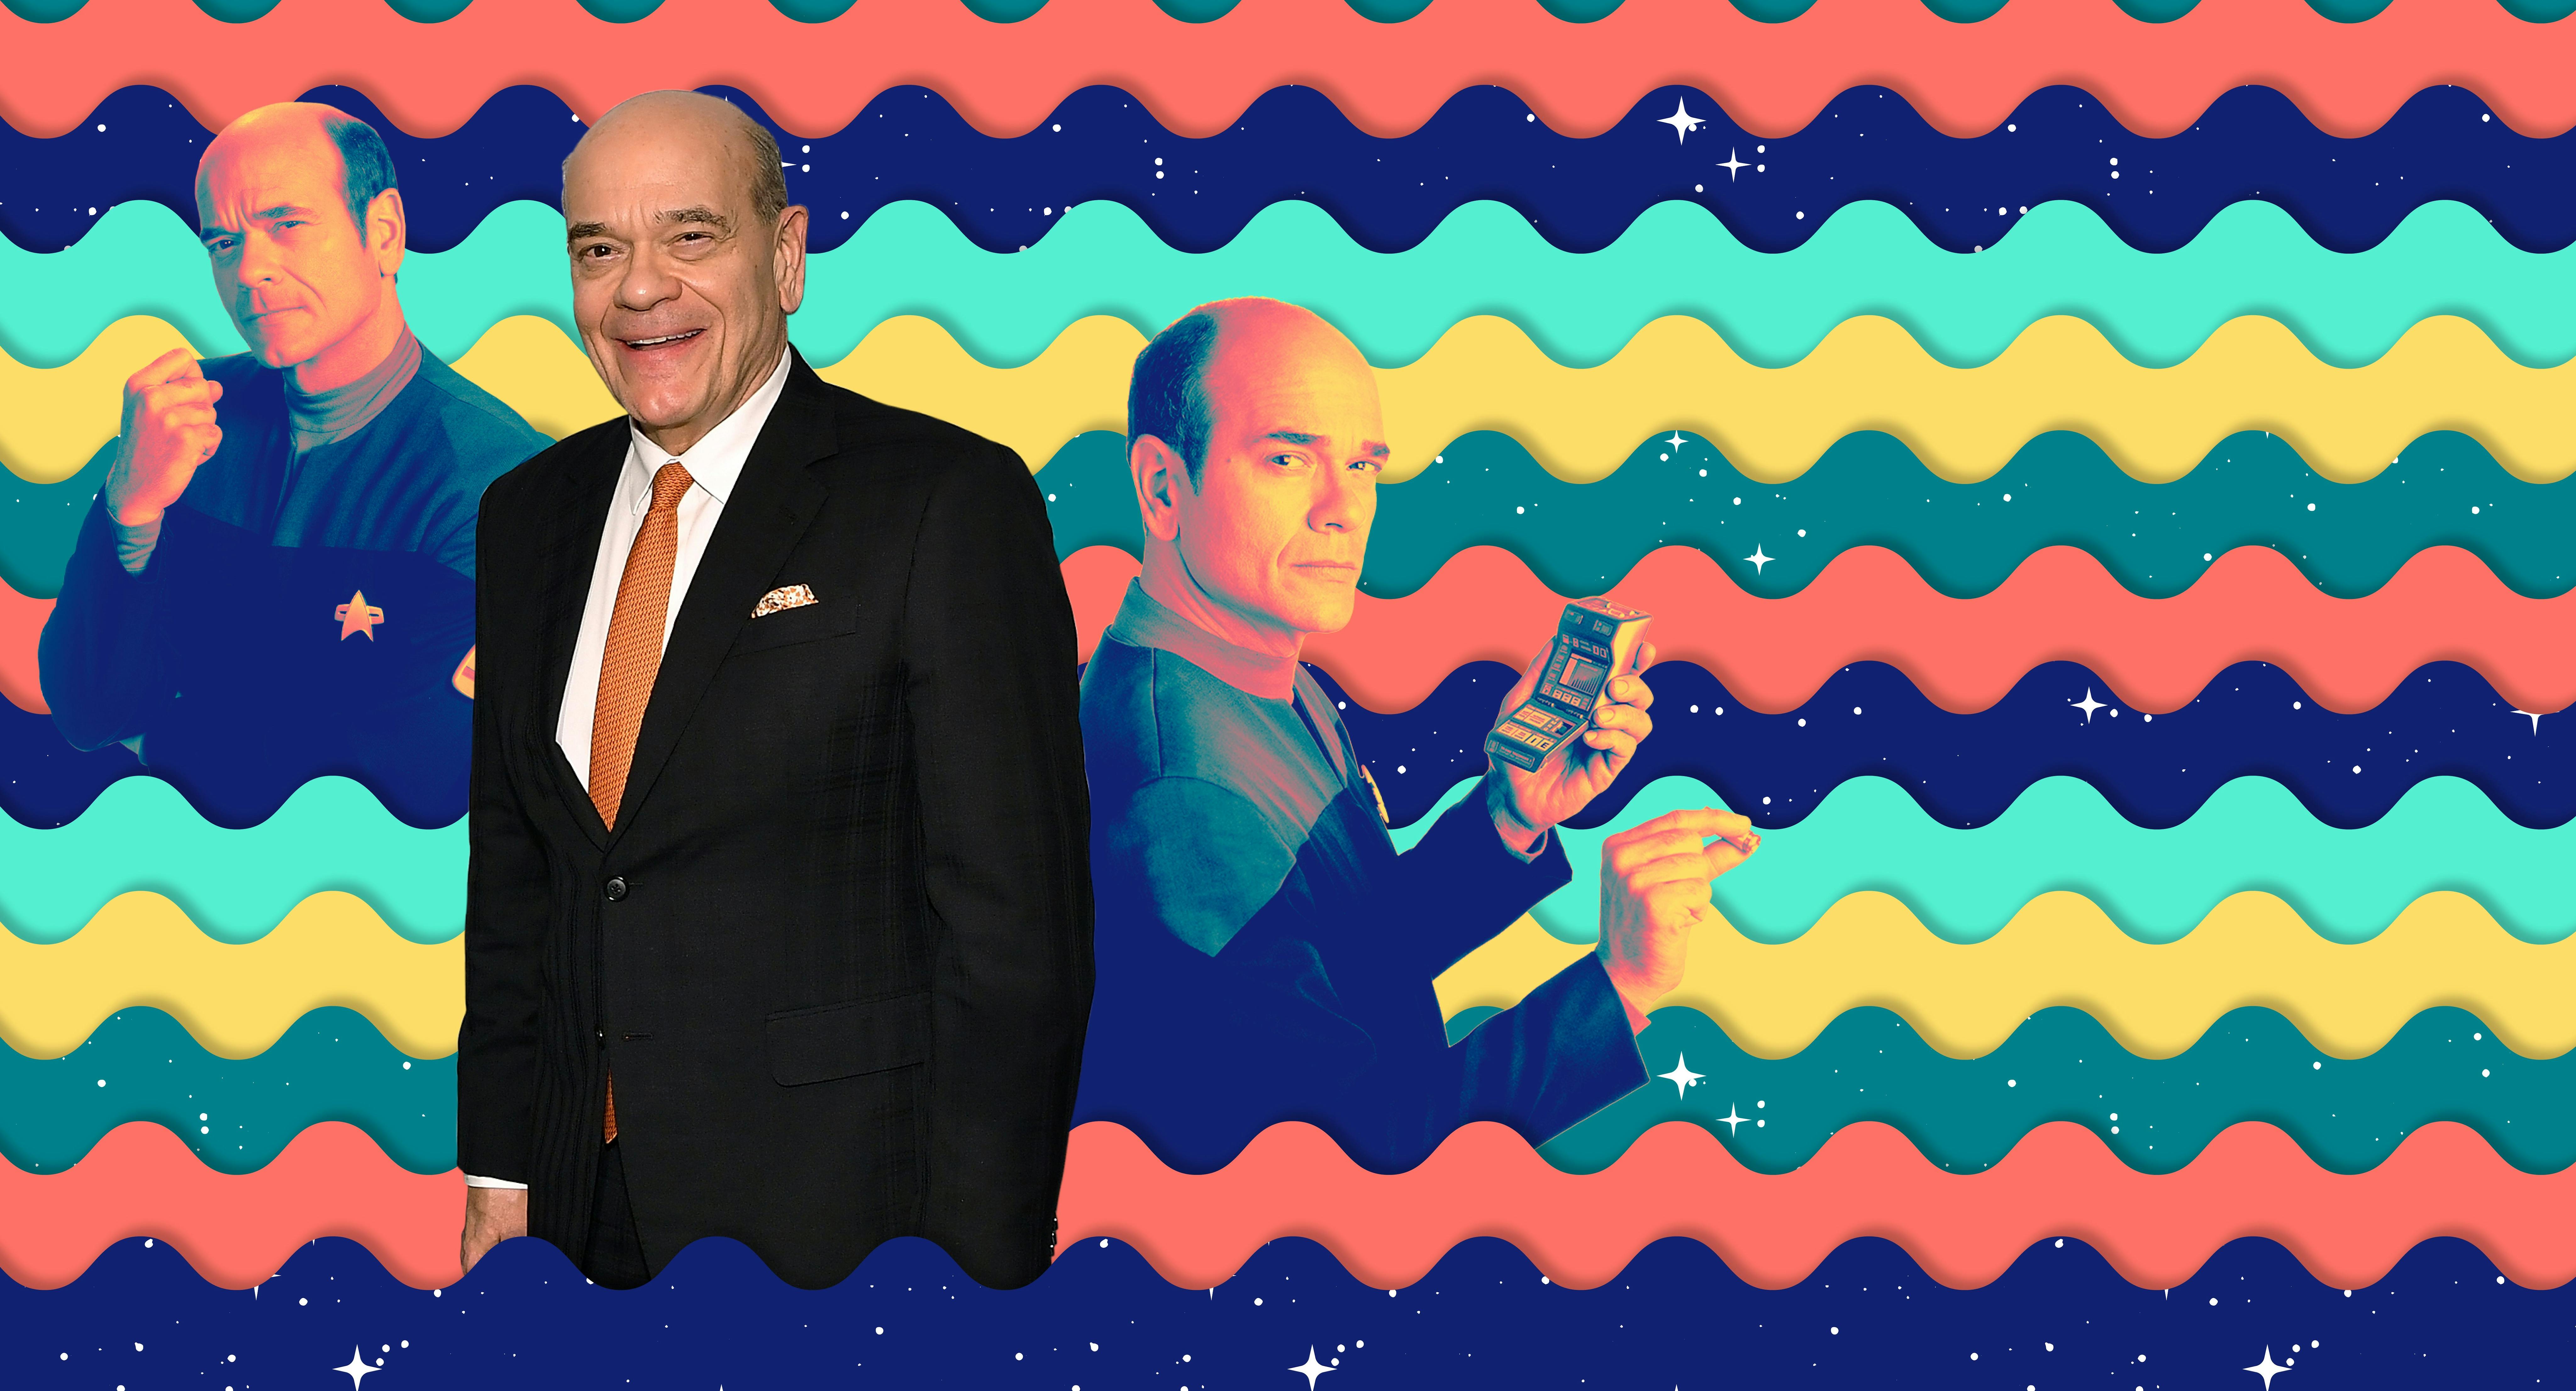 Illustrated banner of Robert Picardo and his Voyager character, the Doctor